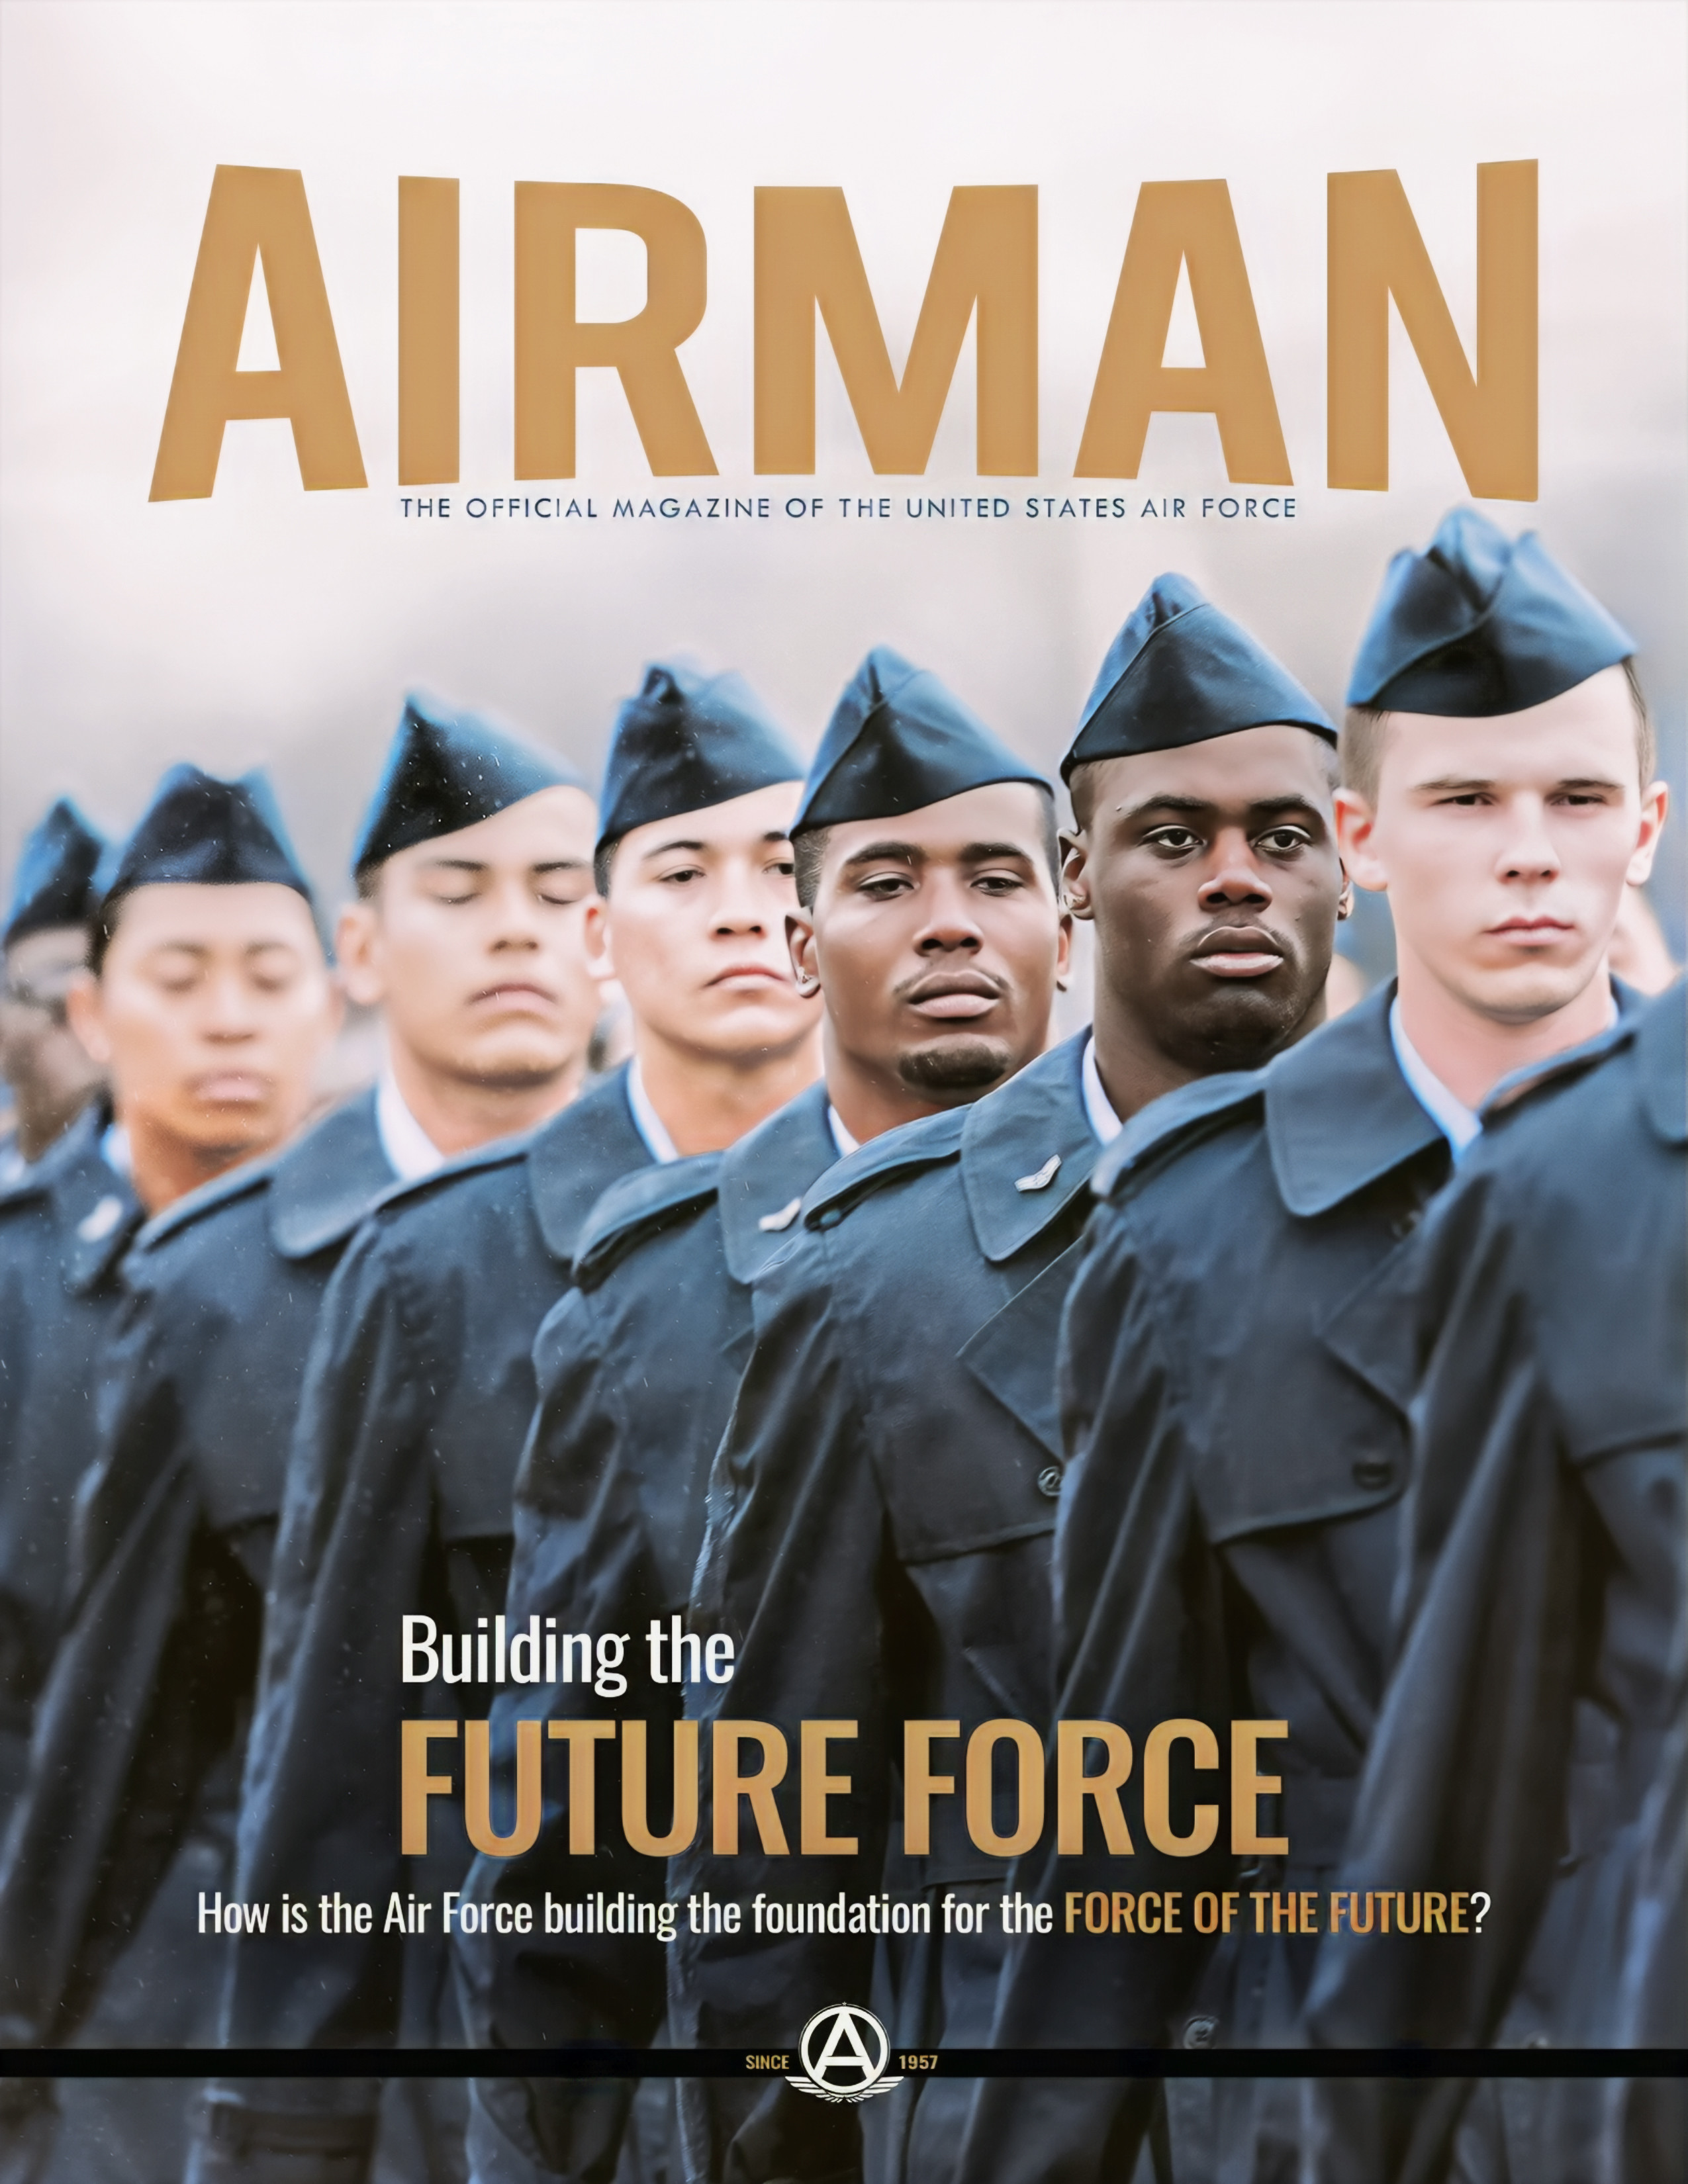 Airman Magazine: Building the Future Force